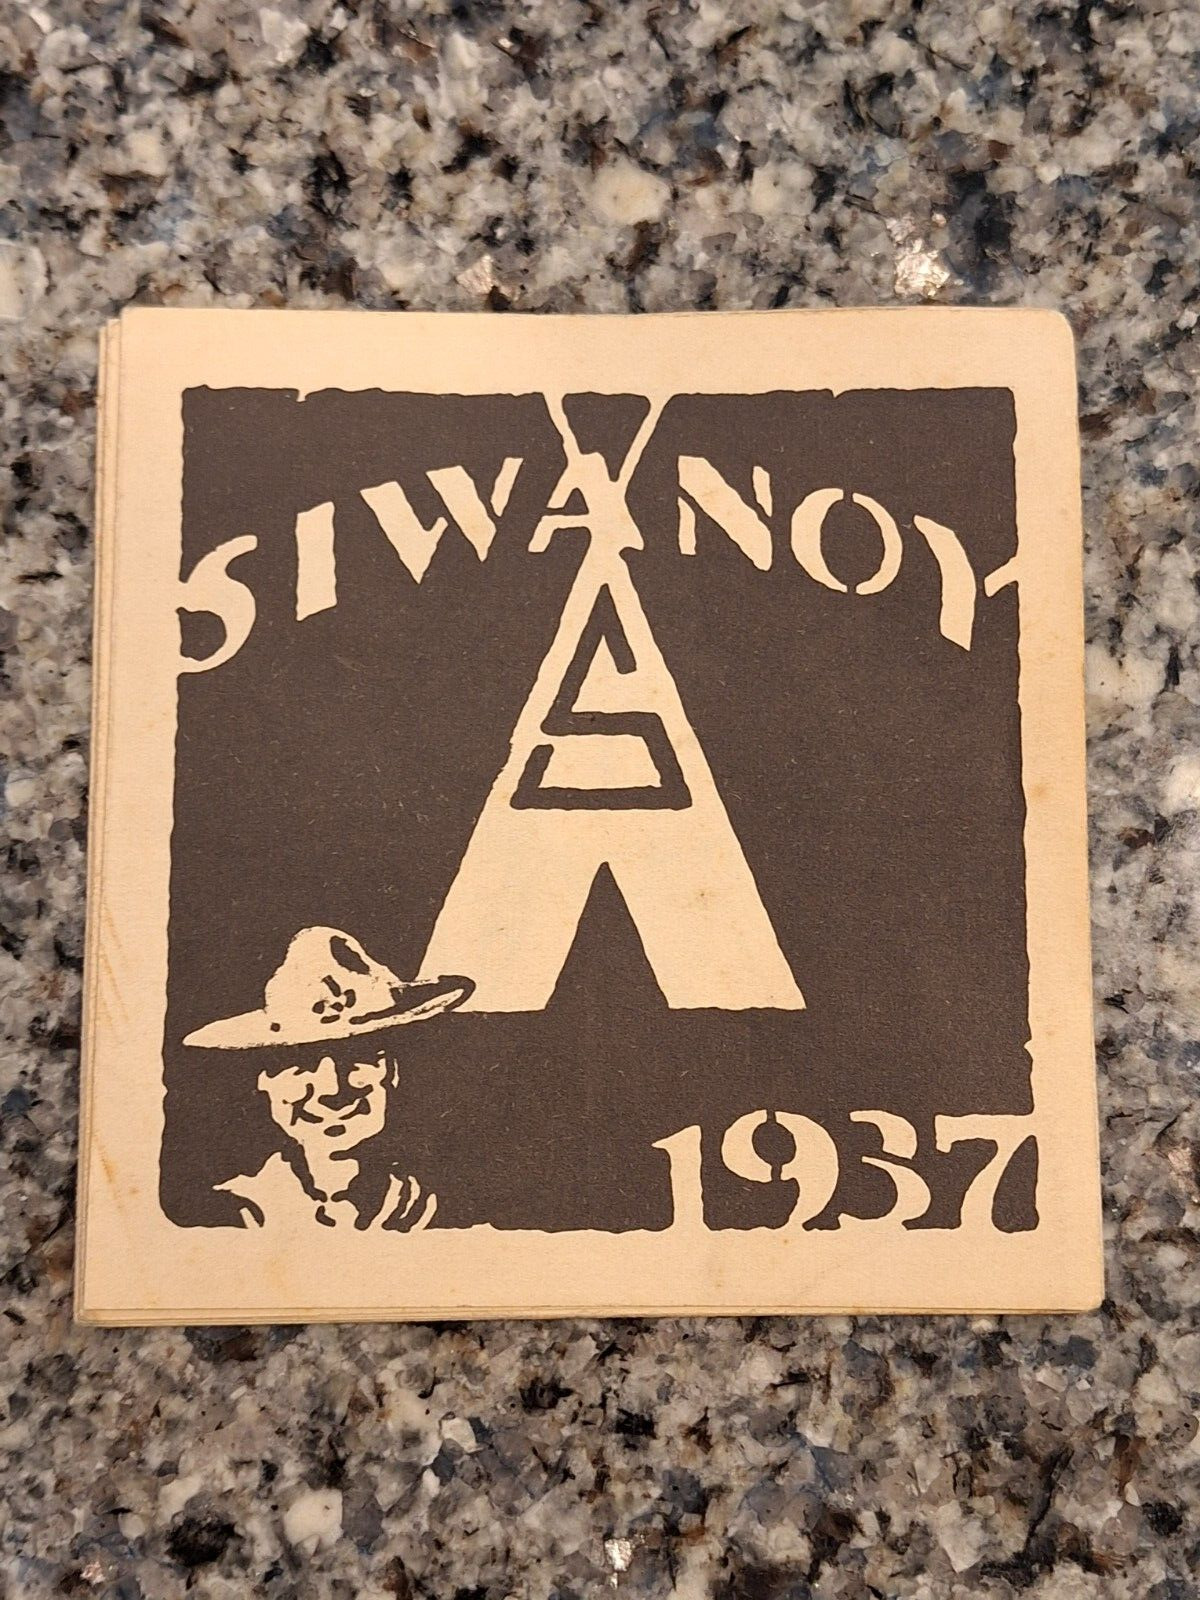 1937 Siwanoy Boy Scout Camp Fold-out Brochure & Application, 42¼\